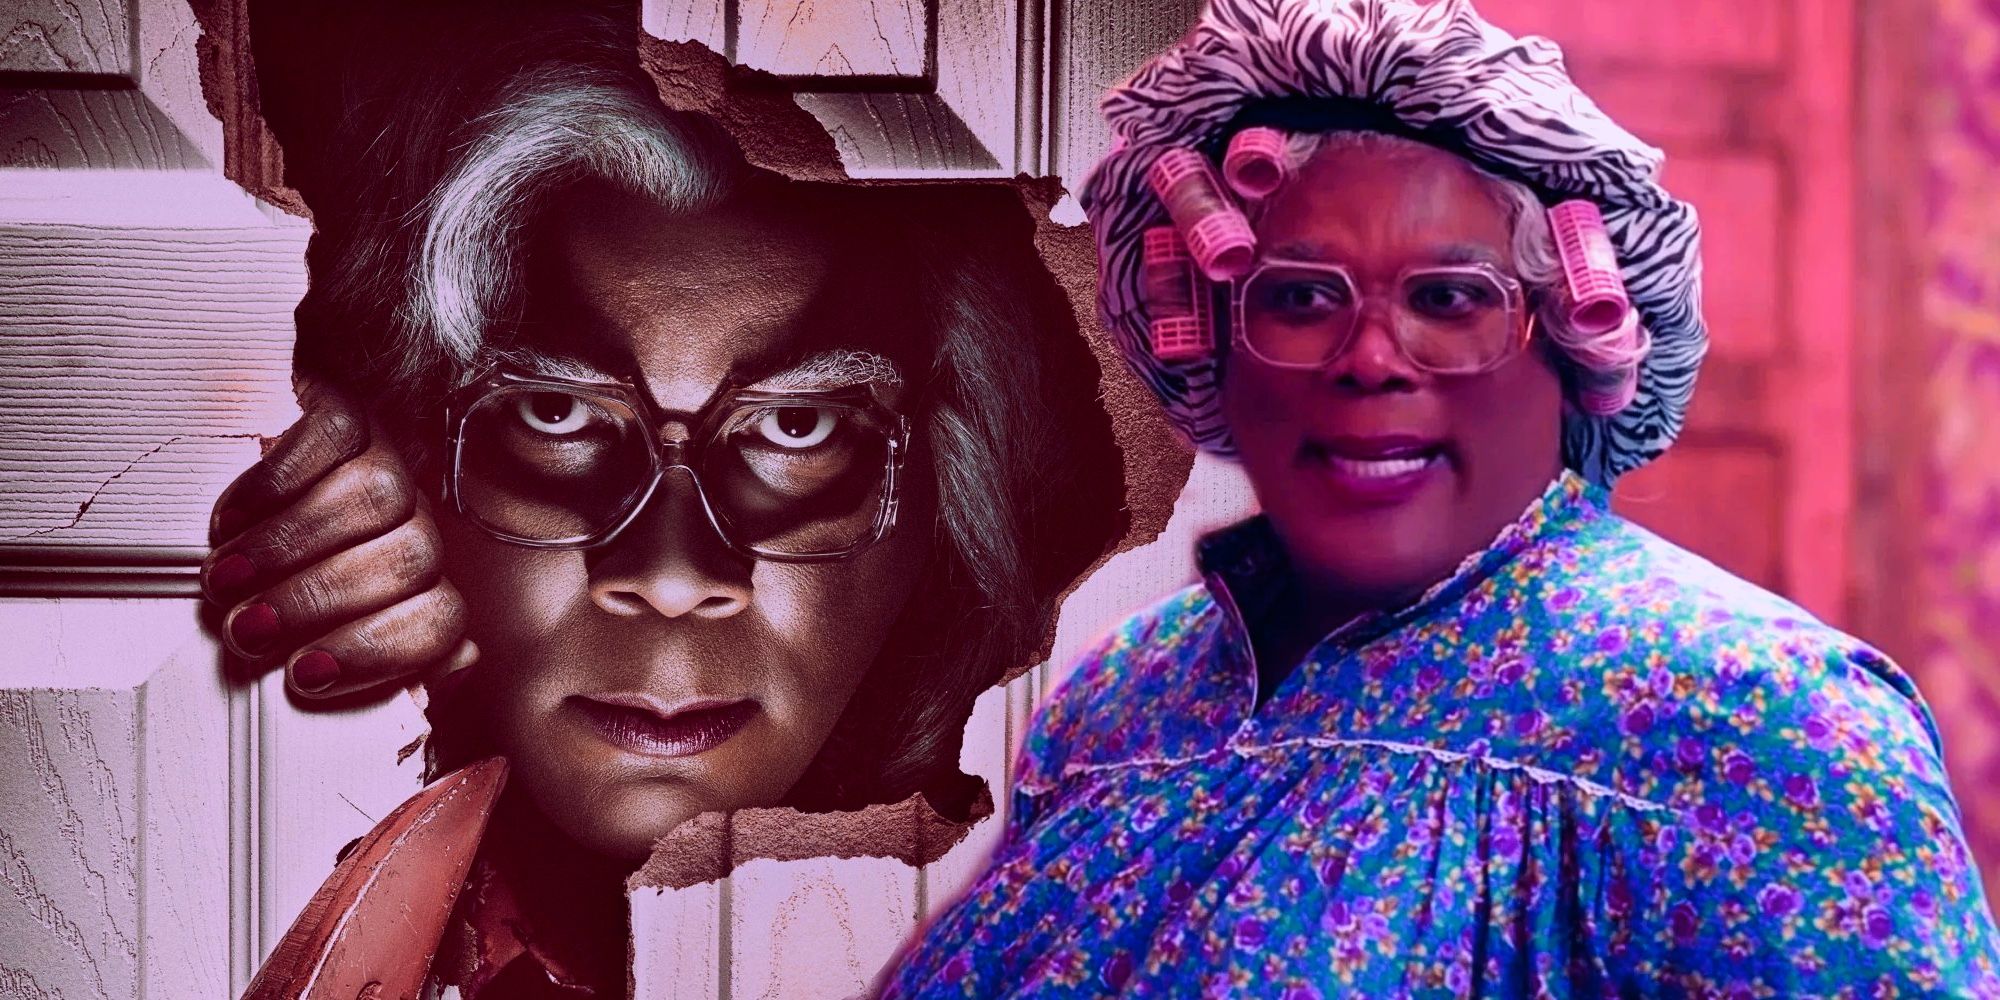 a madea homecoming tyler perry next movie will it happen madea